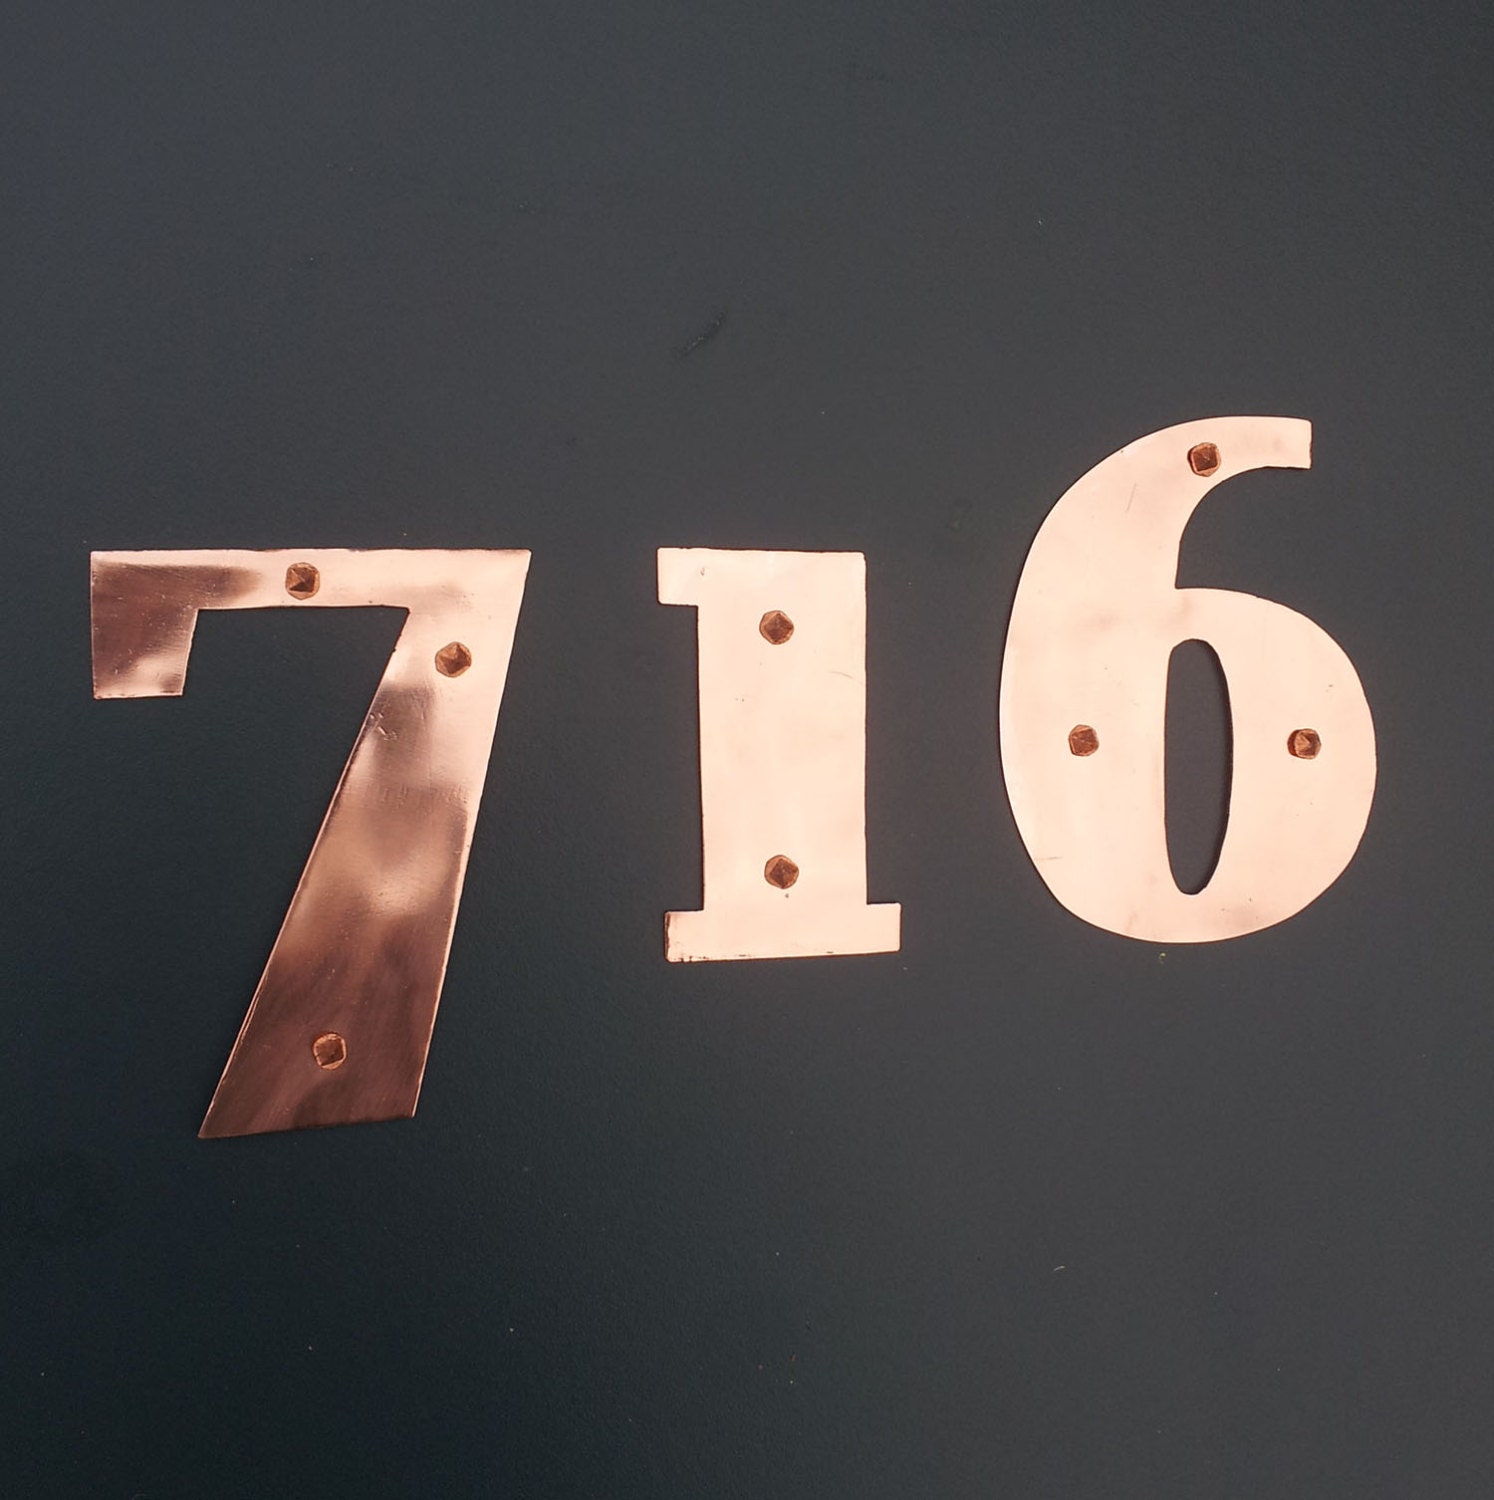 Art Deco house numbers handmade in UK with by DavidMeddingsDeSign